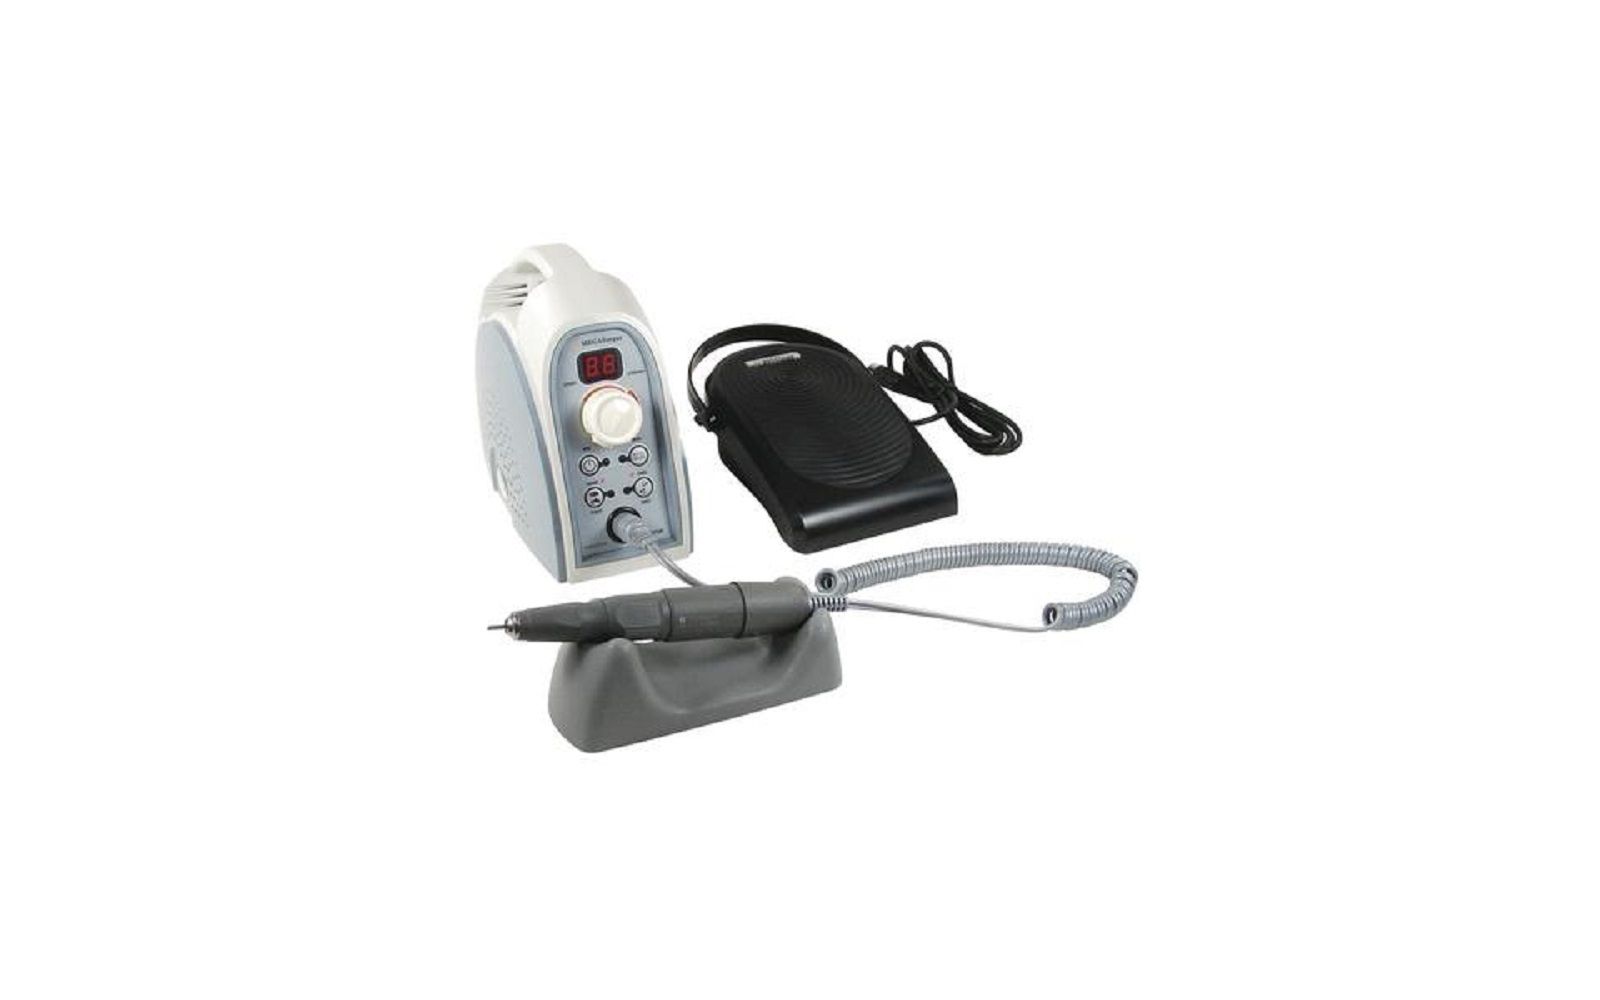 Megatorque electric lab handpiece deluxe set with variable speed foot pedal